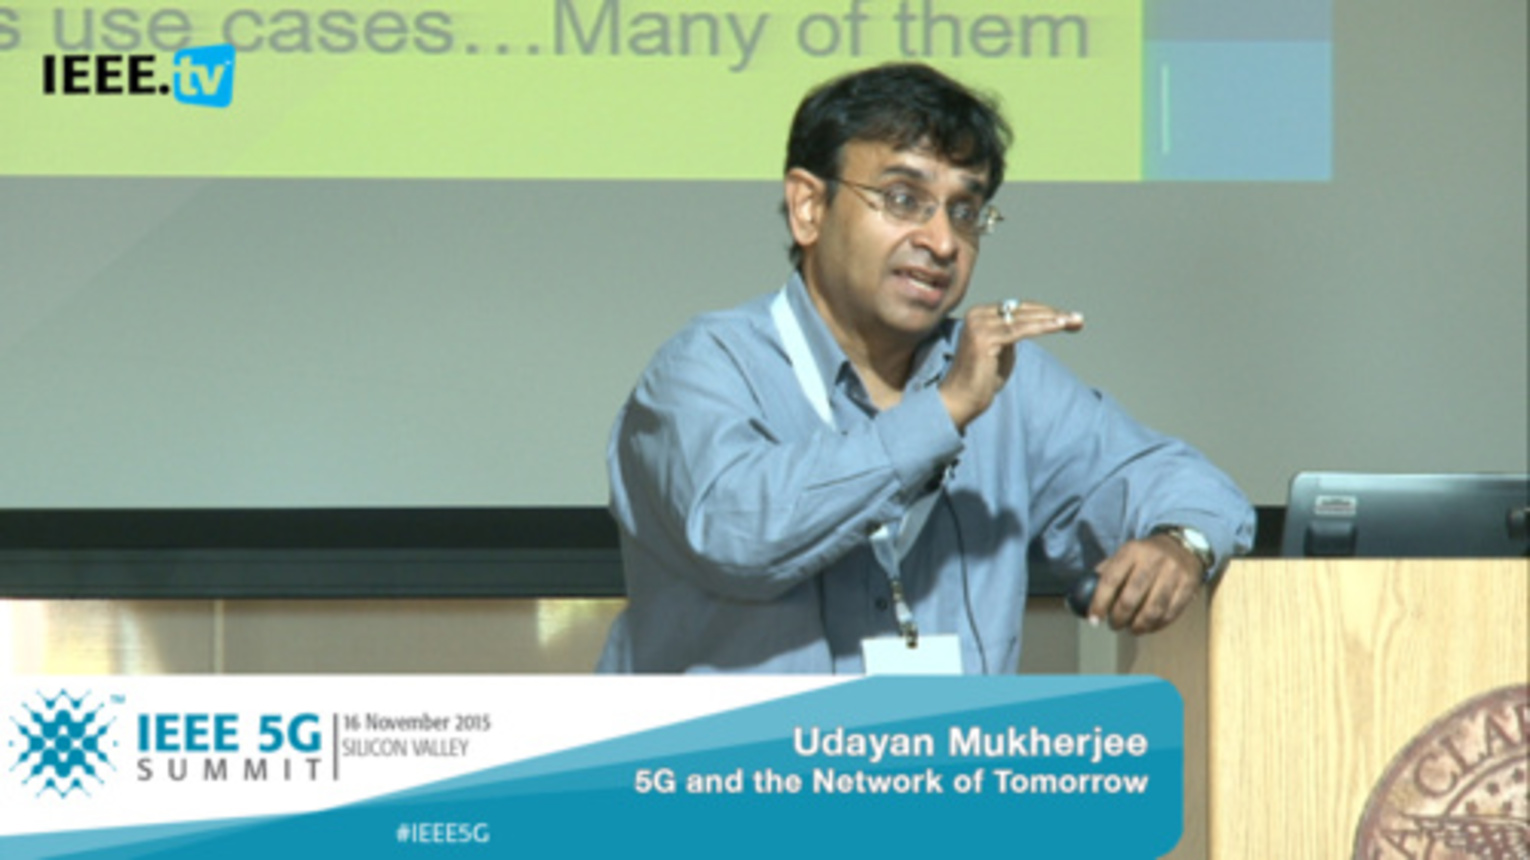 Silicon Valley 5G Summit 2015 - Udayan Mukherjee - 5G and the Network of Tomorrow